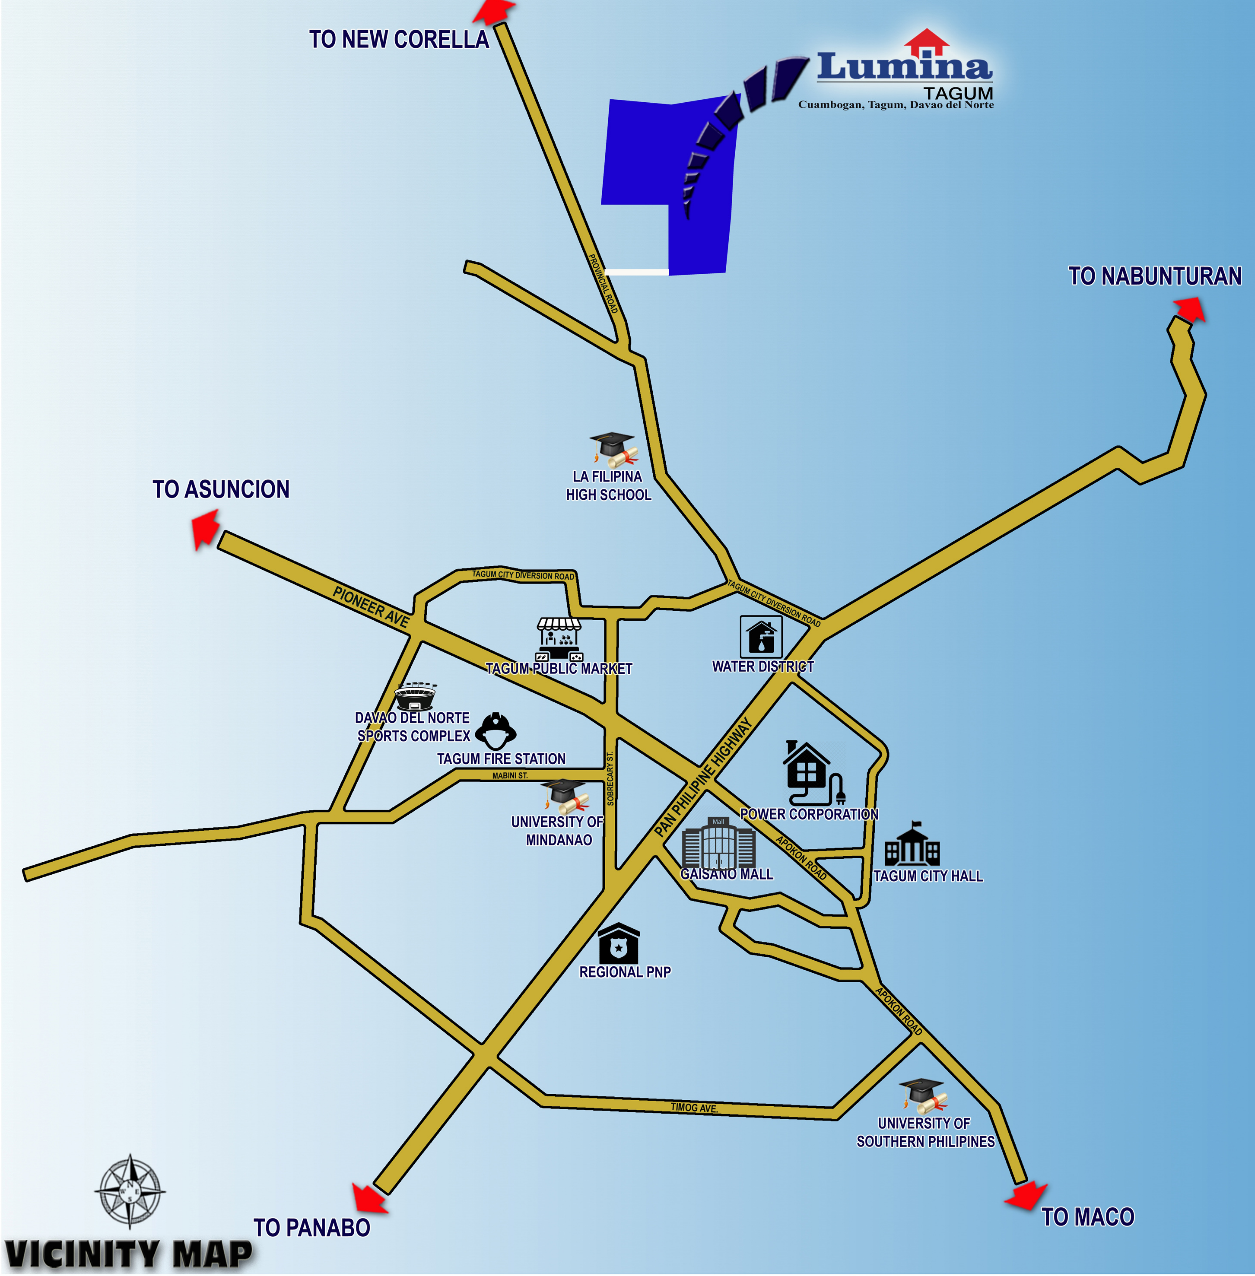 VICINITY-MAP-1645421053.png